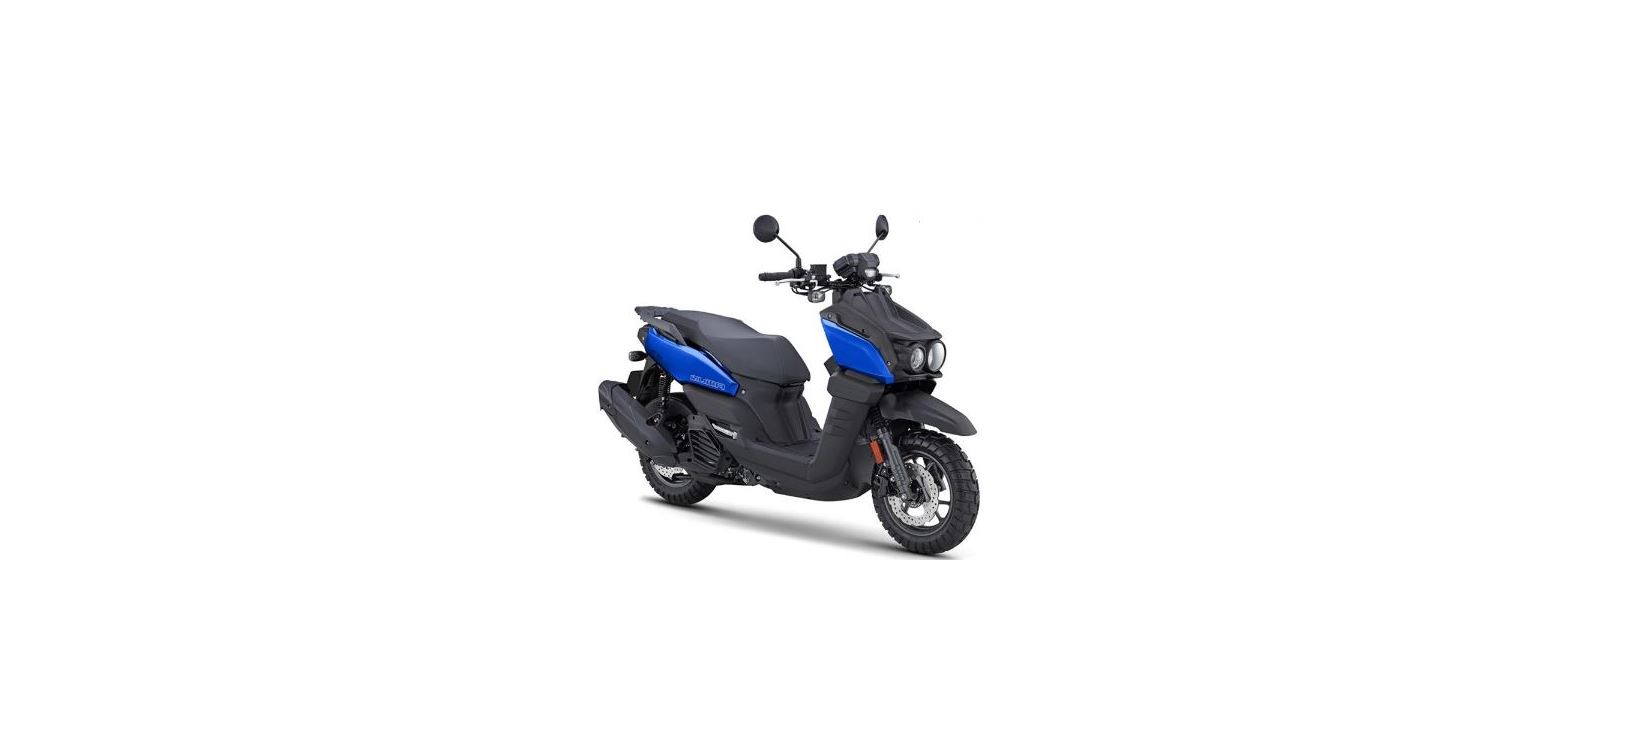 2022 Yahama Motorcycles & Scooters